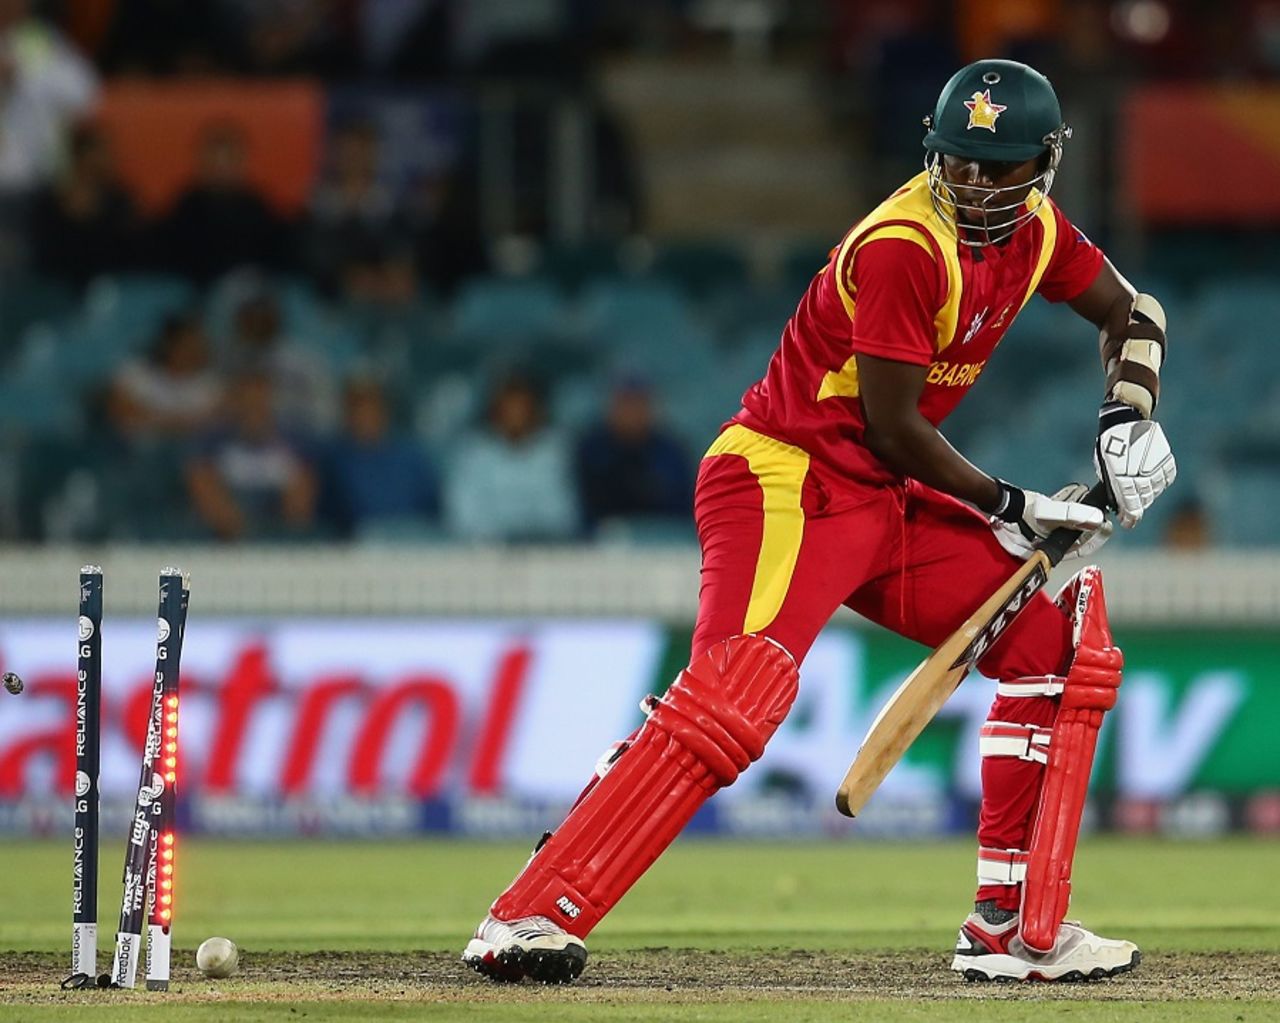 Tendai Chatara was the last man dismissed, West Indies v Zimbabwe, World Cup 2015, Group B, Canberra, February 24, 2015 